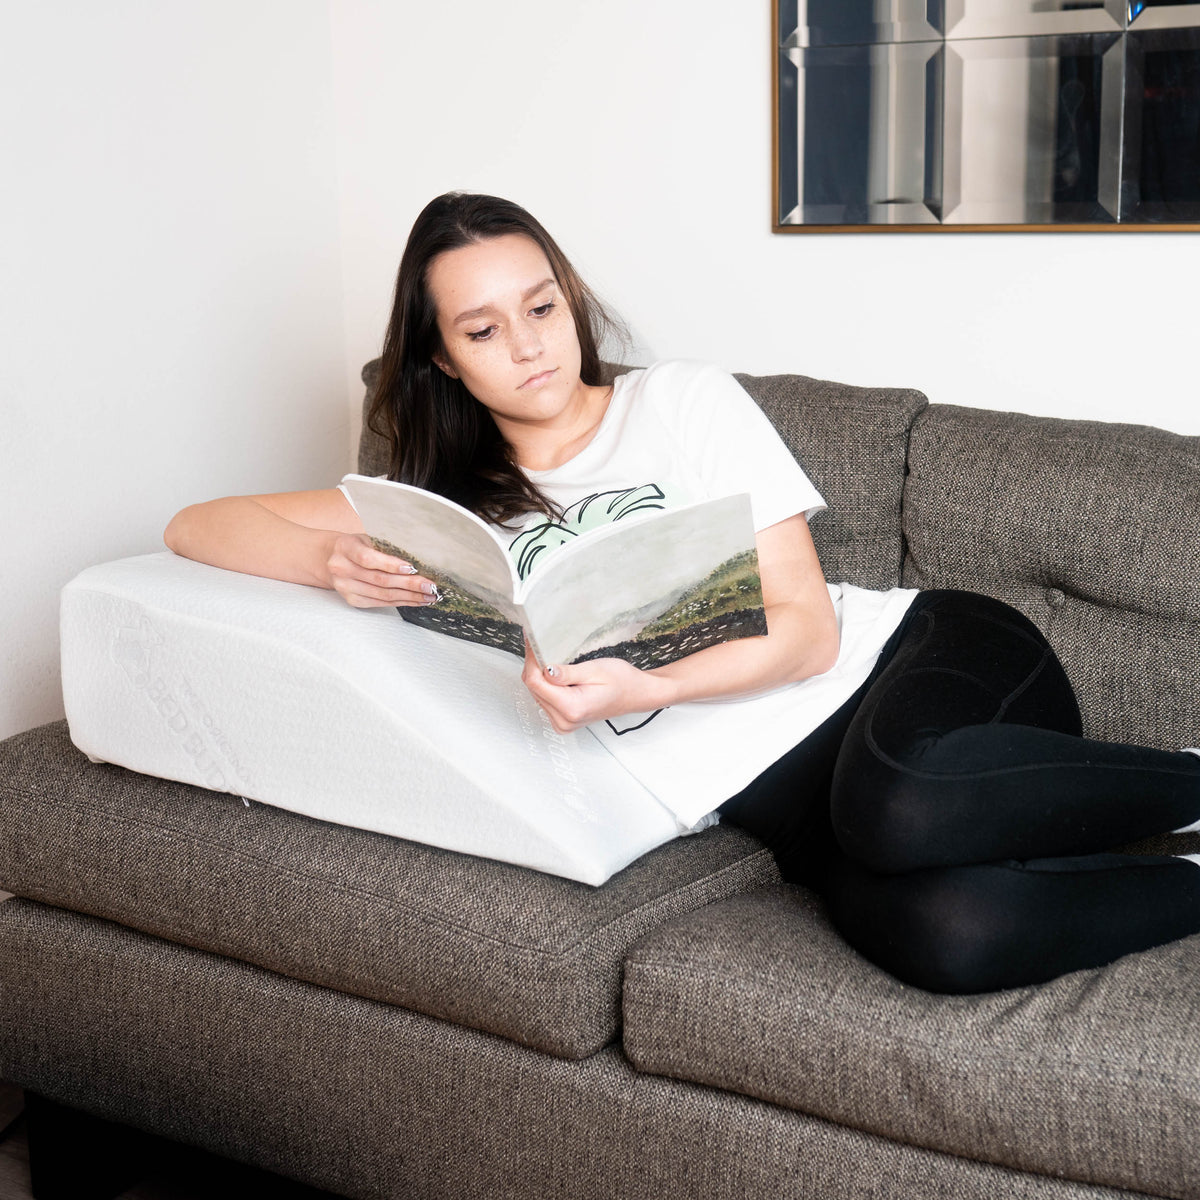 A woman reading a magazine on the couch while leaning on the Bed Buddy Leg Wedge Pillow